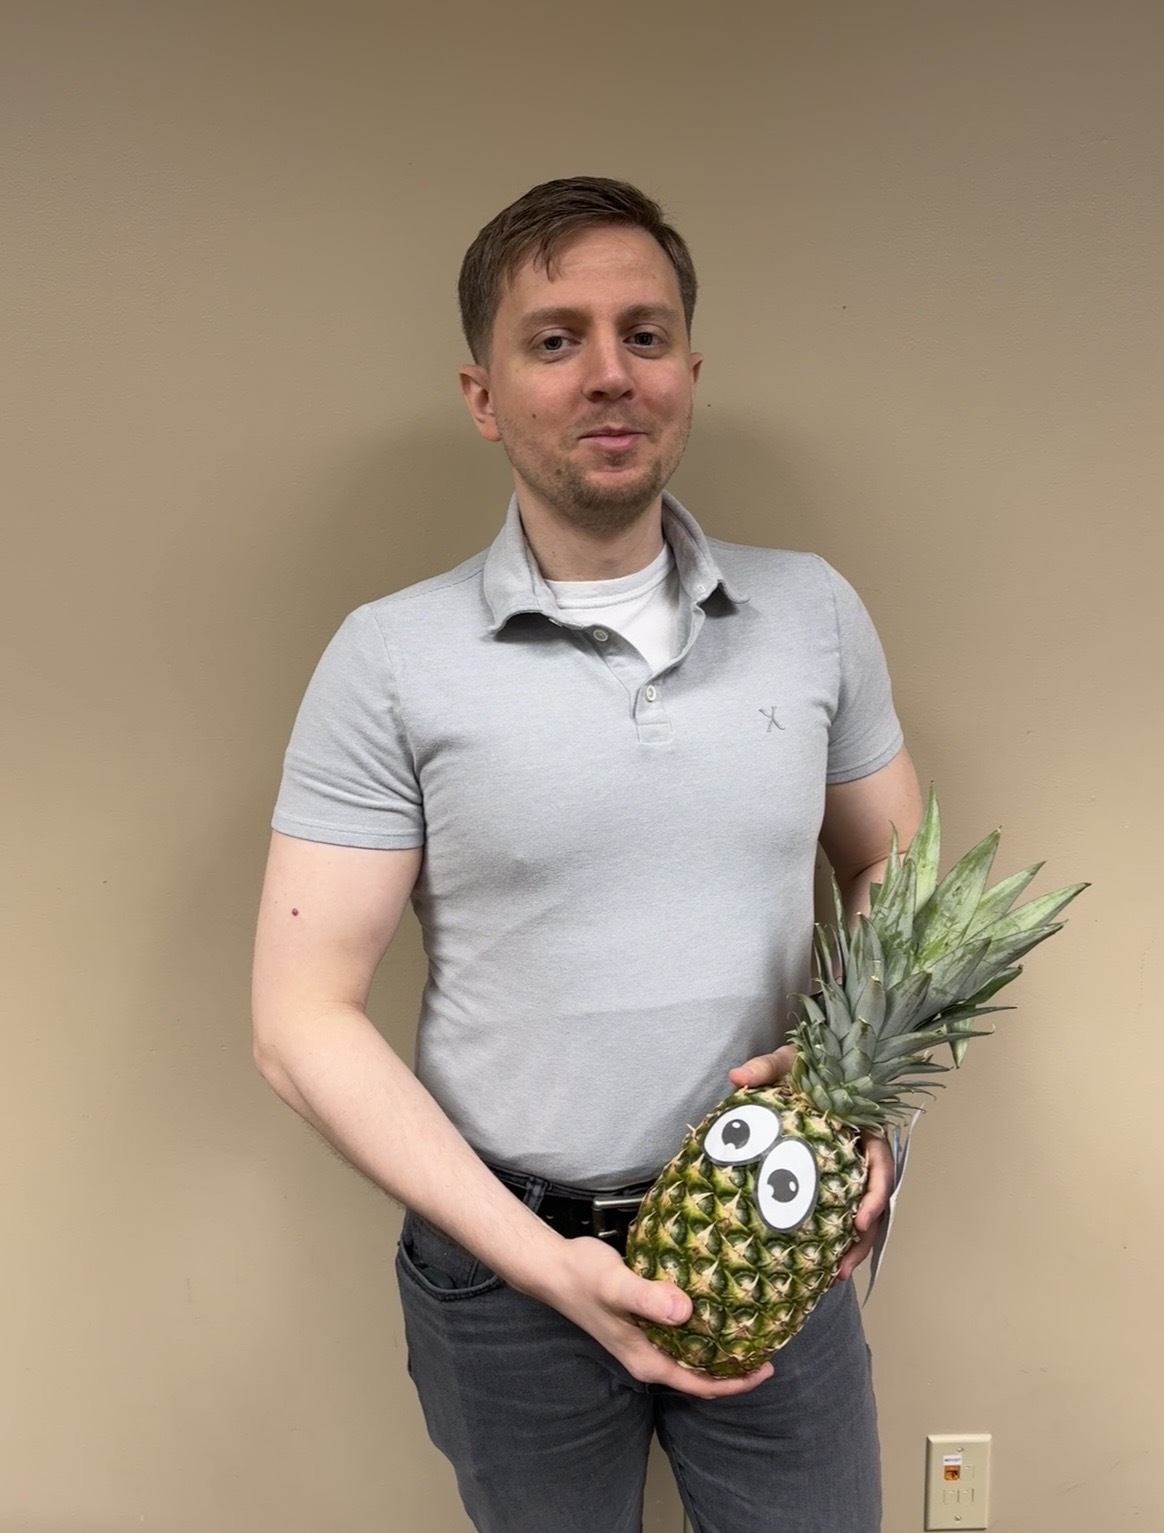 Faculty member Mark Morgan poses with a pineapple to signify graduation from ATLS.